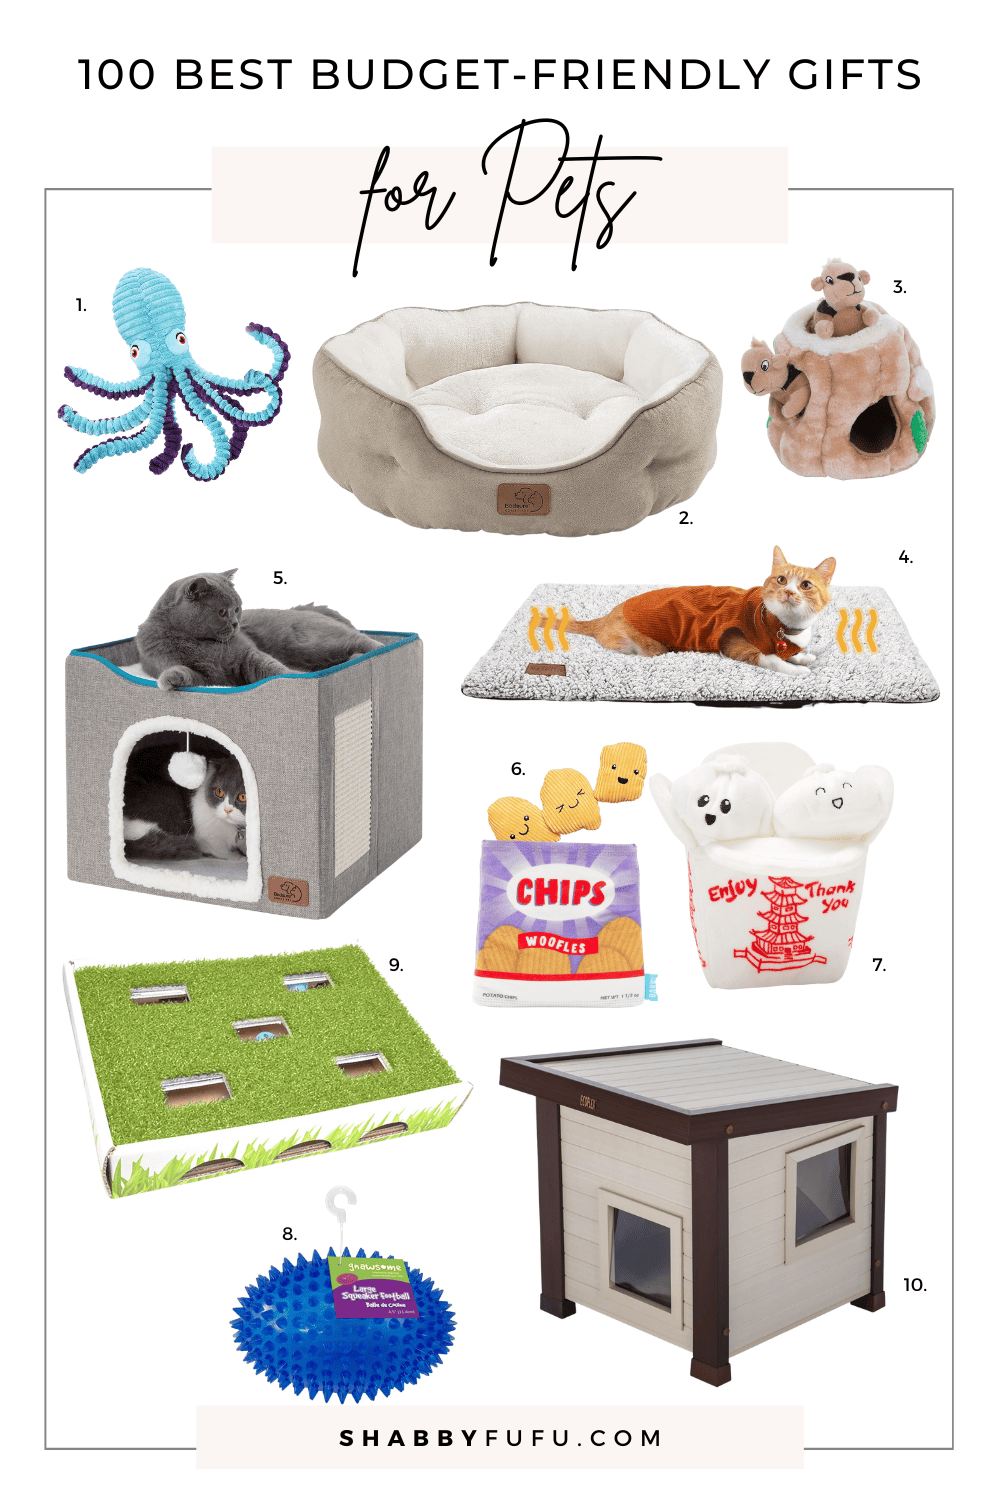 Collage image featuring different products titled "100 Best Budget Friendly Holiday Gifts For Pets"